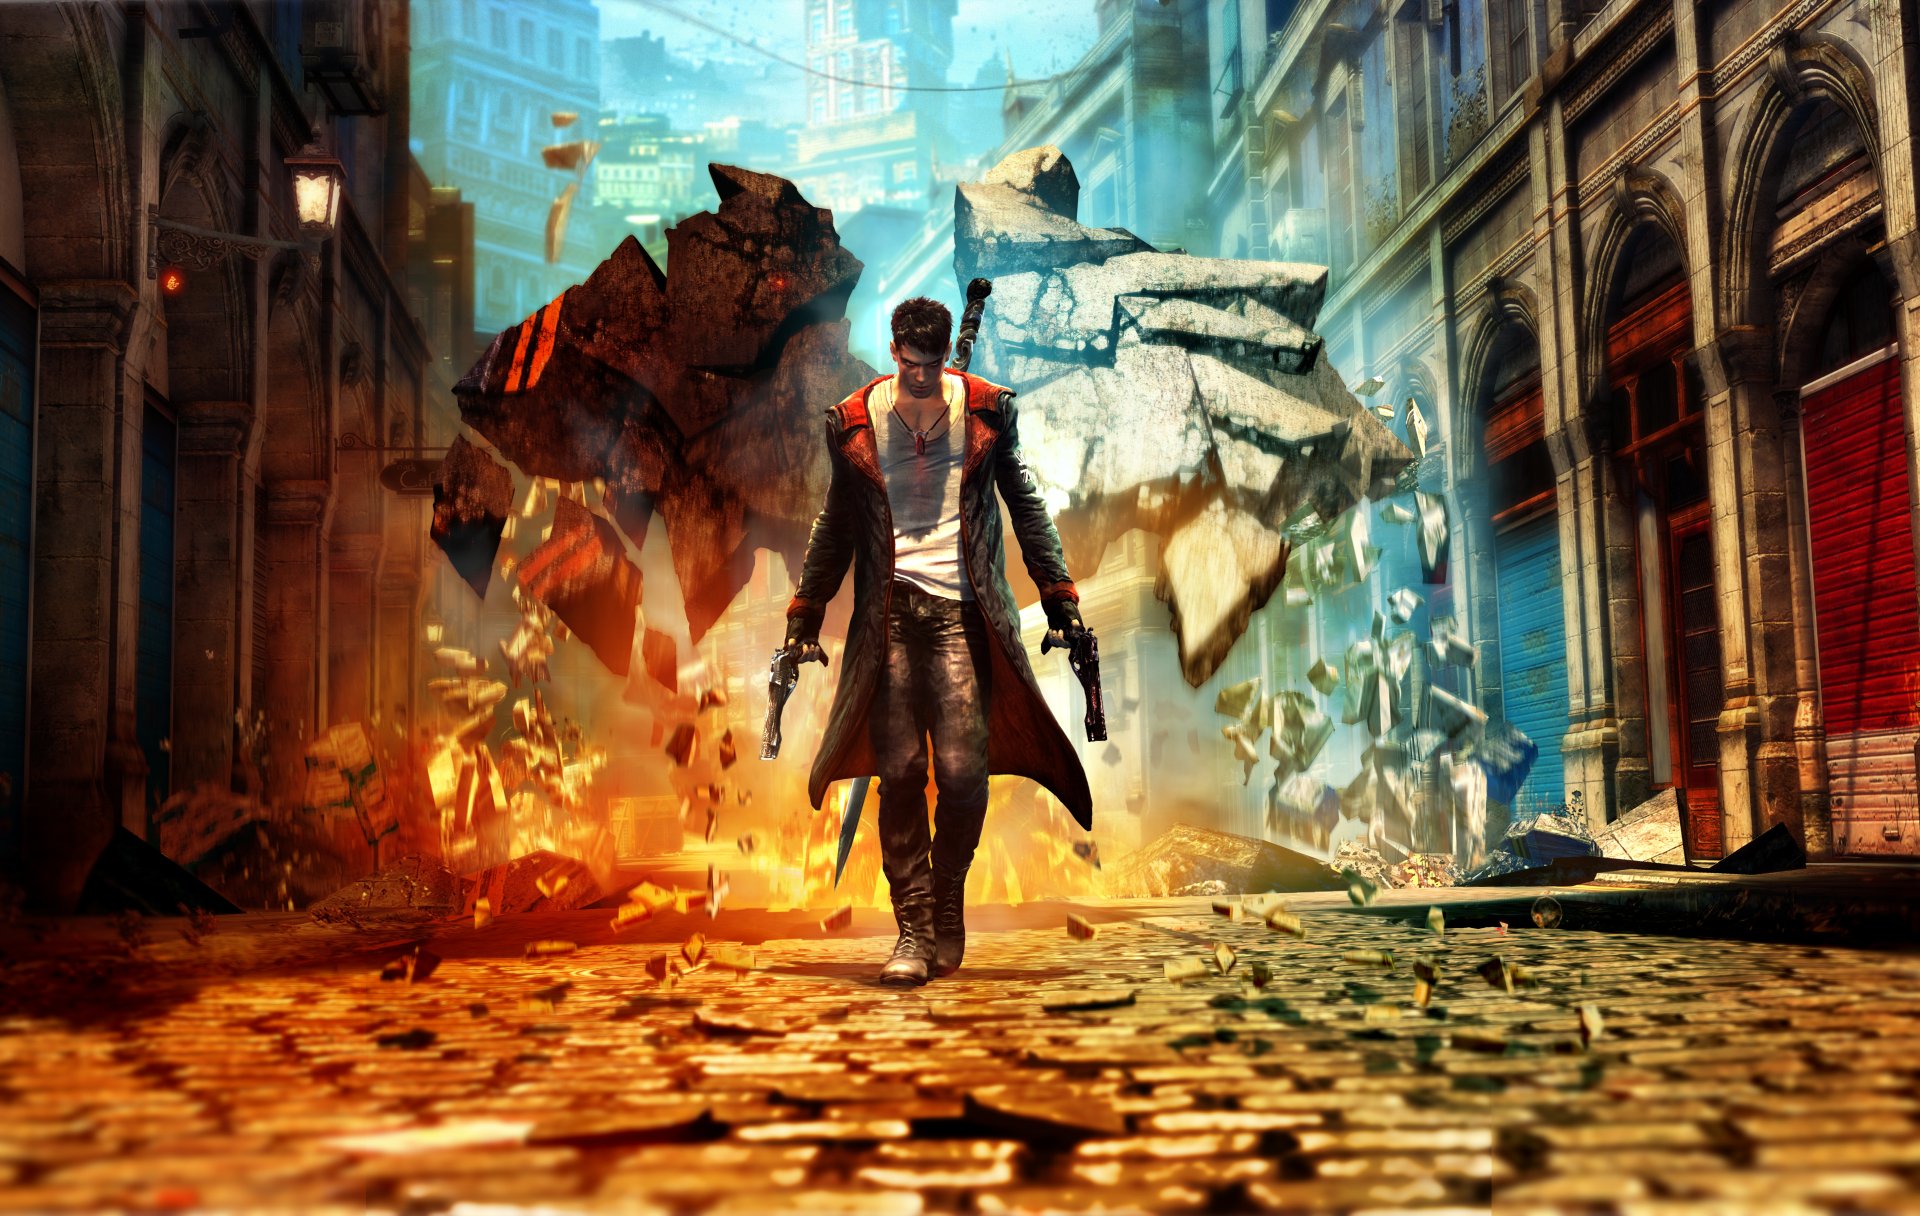 DMC Devil may cry 2 game special wallpaper by me by Hatredboy on